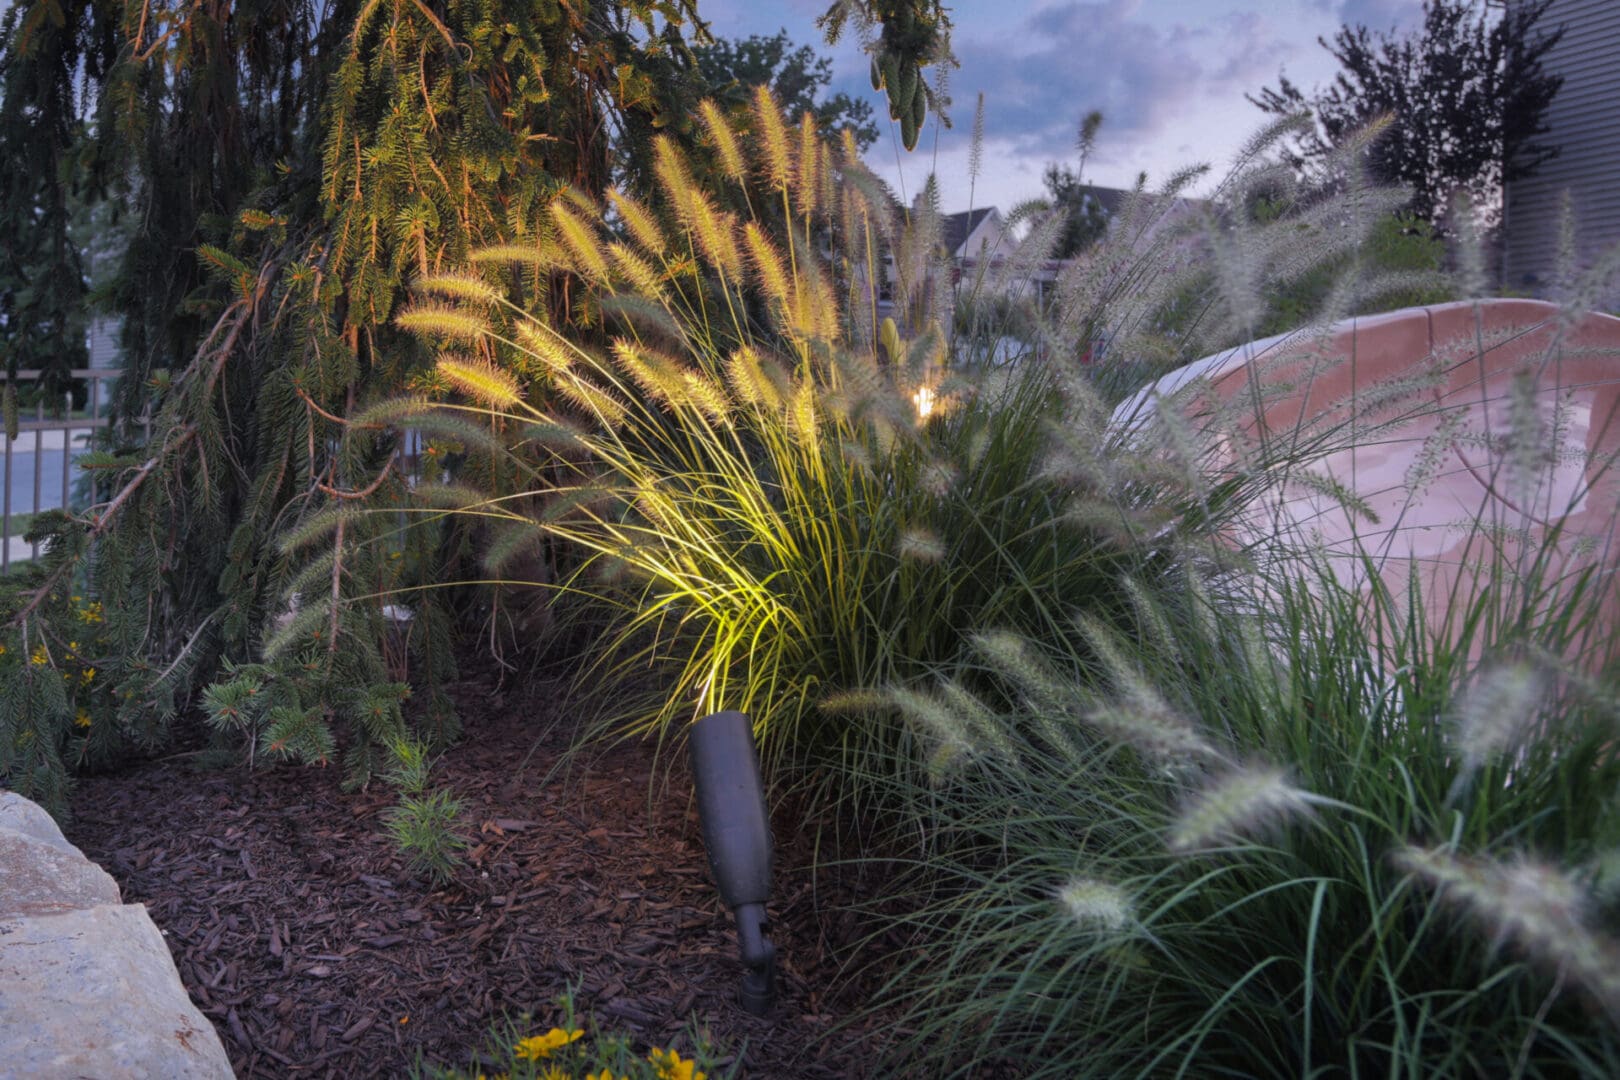 A grassy area with bushes and trees, enhanced by outdoor lighting for a serene ambiance.